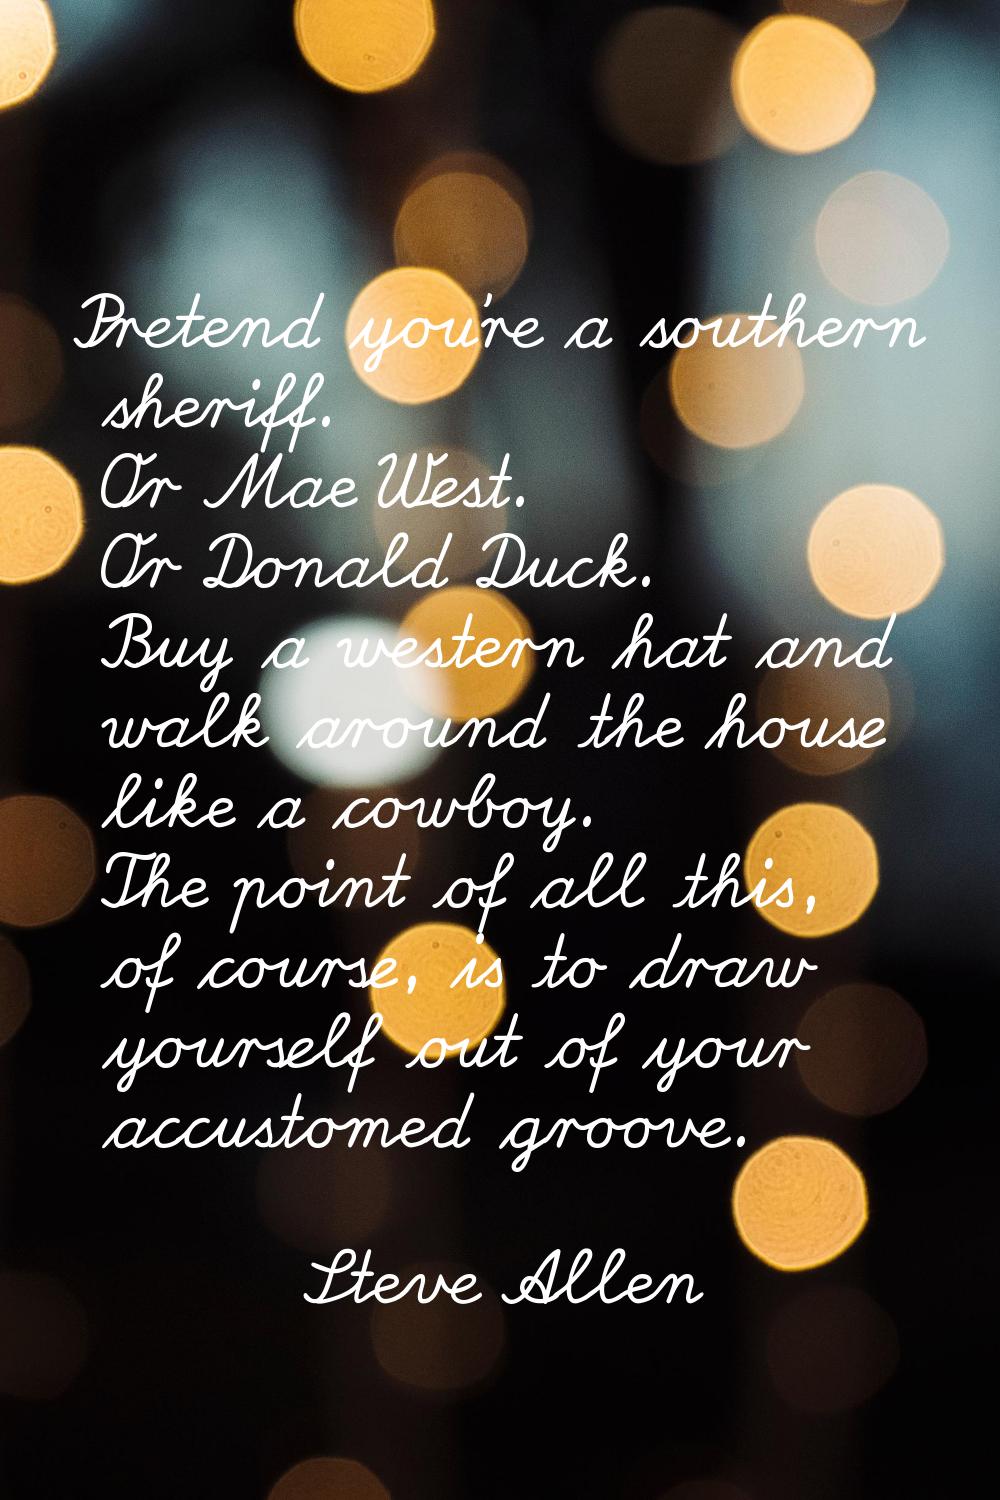 Pretend you're a southern sheriff. Or Mae West. Or Donald Duck. Buy a western hat and walk around t